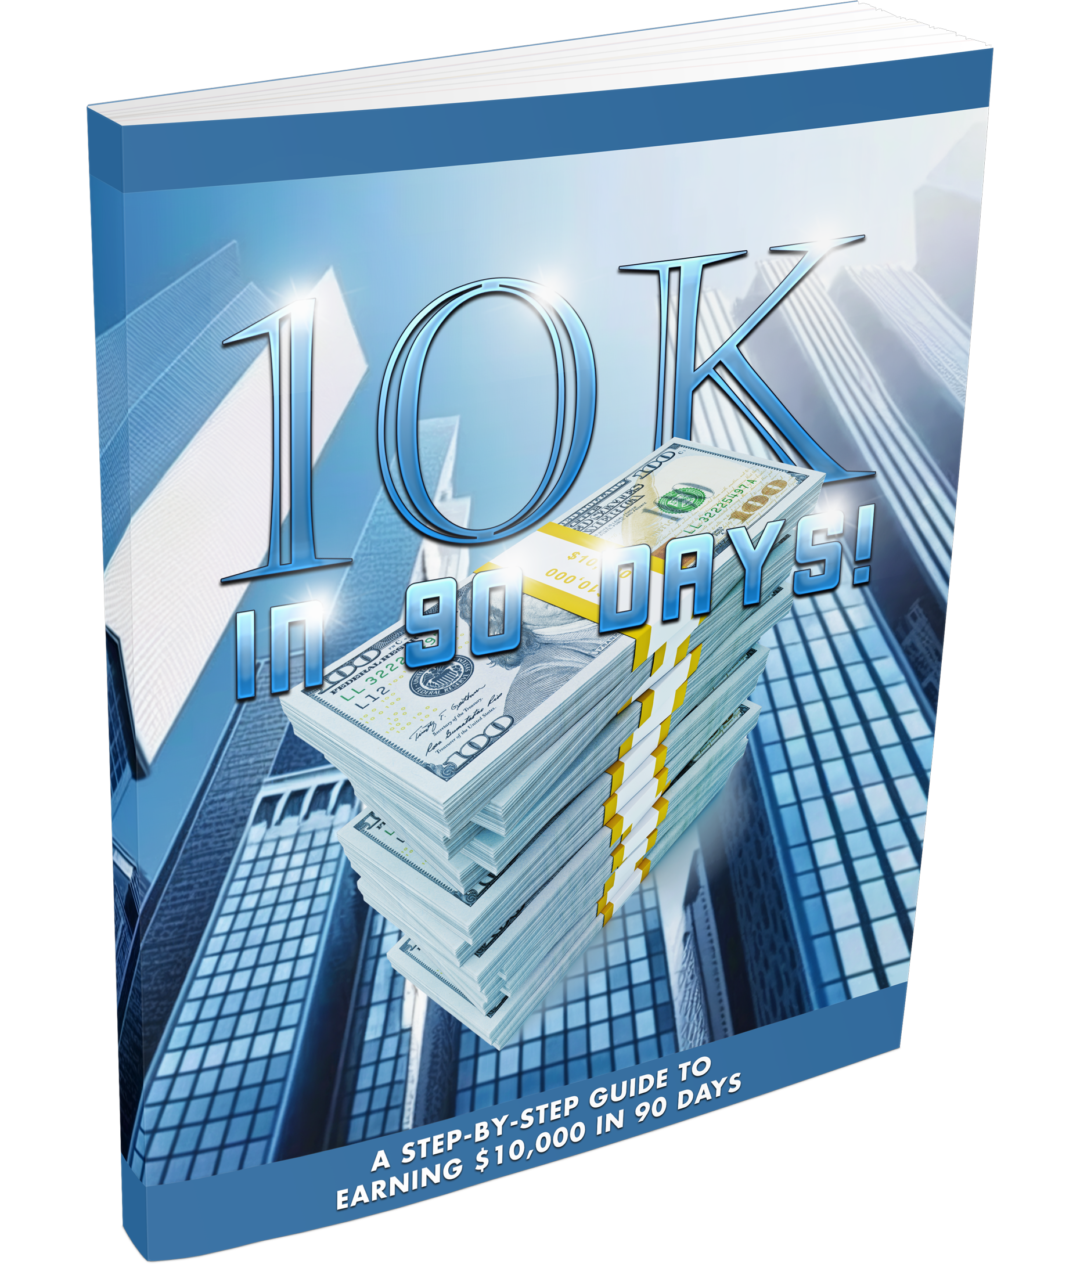 10k-in-90-days-pack-bigproductstore